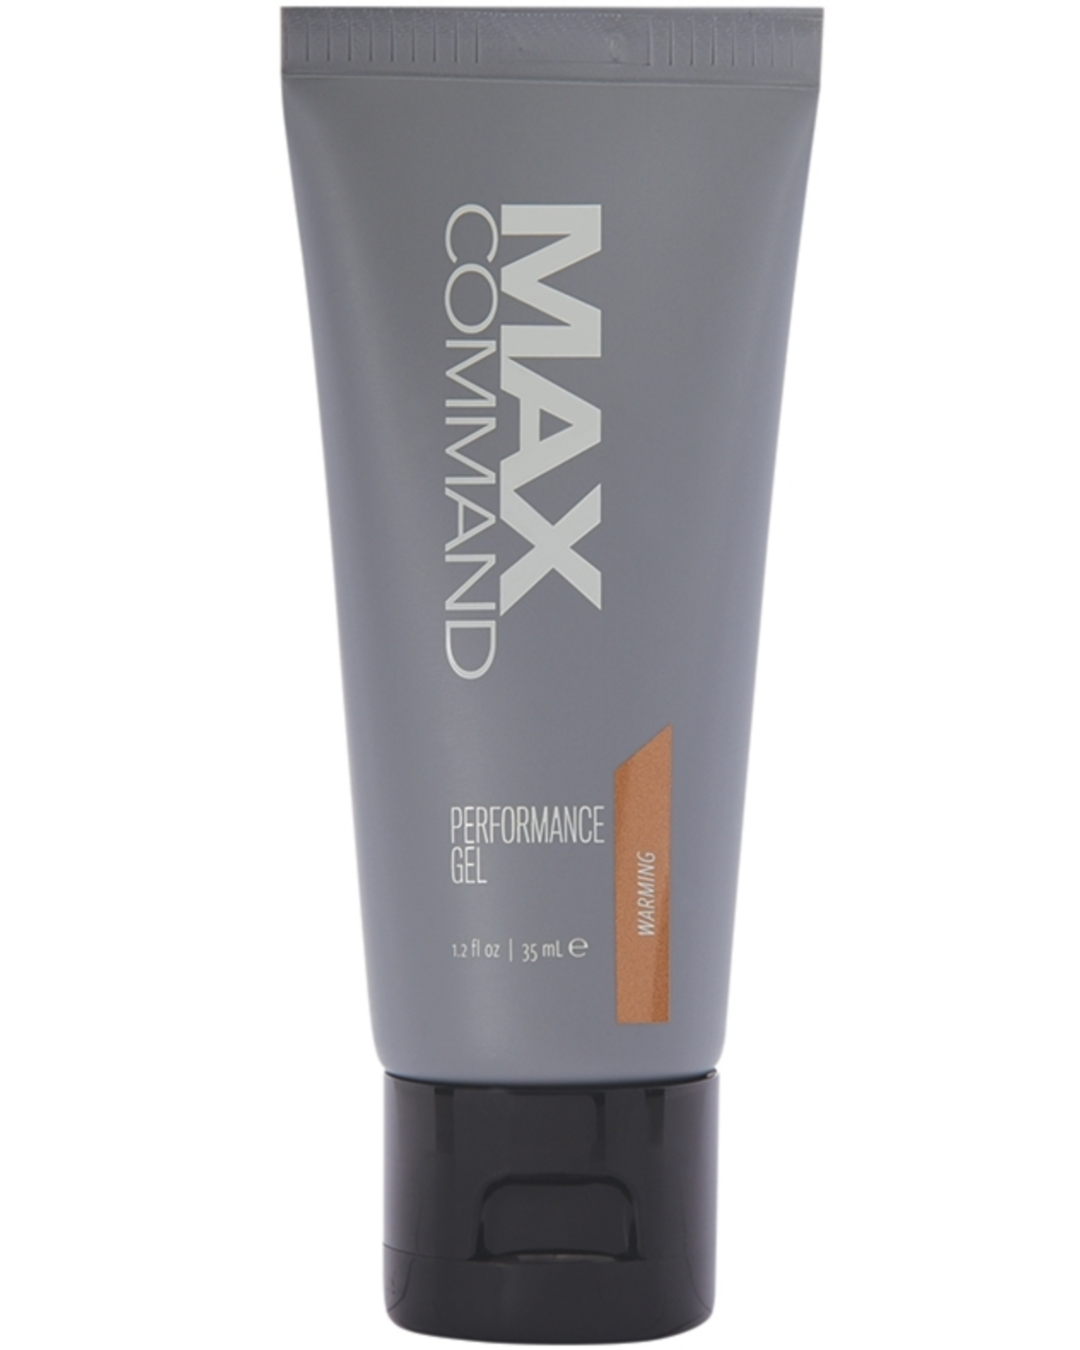 Max Command Performance Gel - Warming 1.2 oz up closes of bottle 